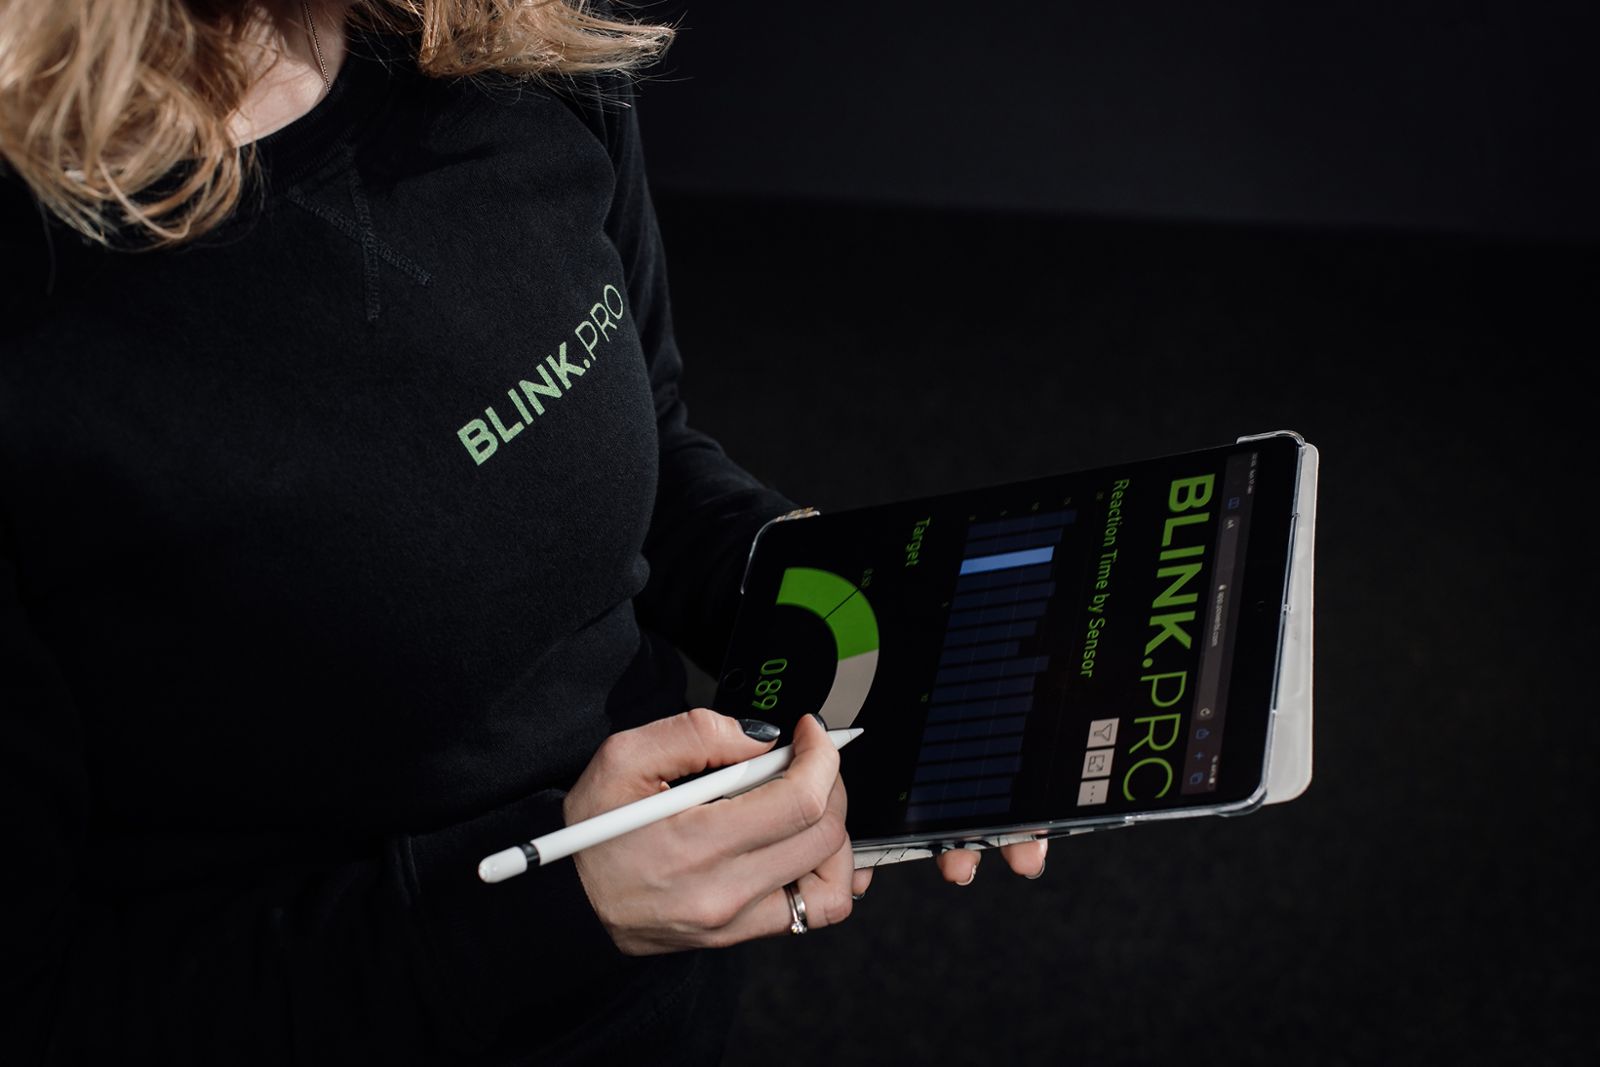 A personal trainer setting up a blink pro ready for use in her gym